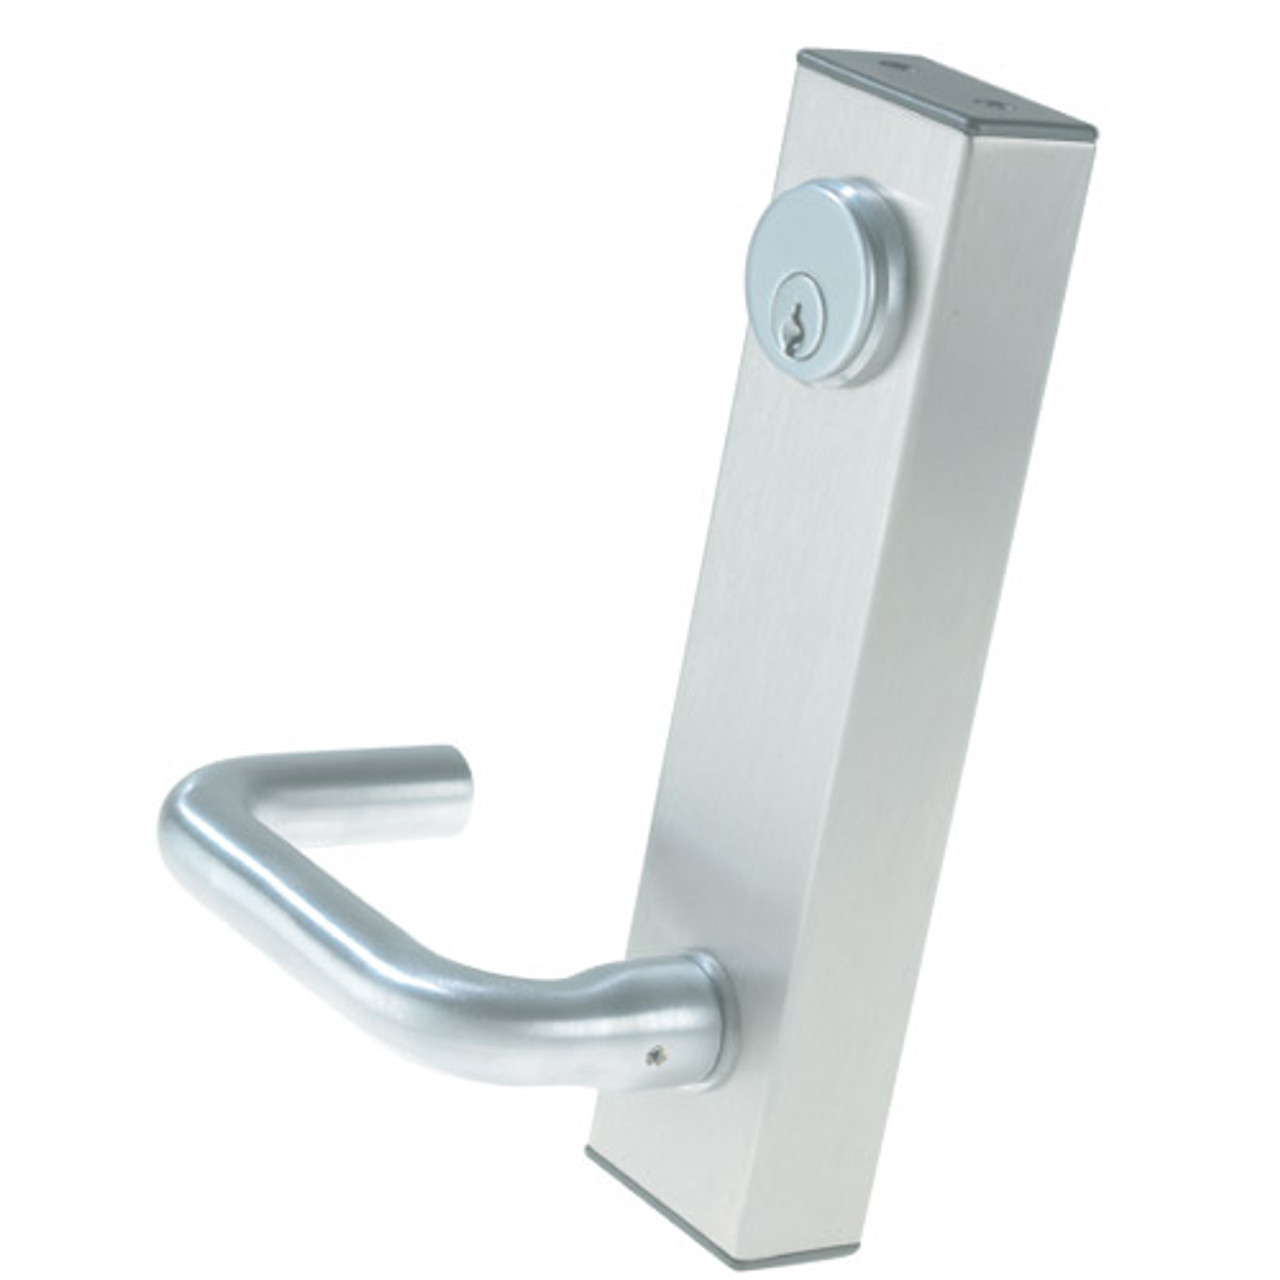 3080E-02-0-31-50 US32 Adams Rite Electrified Entry Trim with Round Lever in Bright Stainless Finish